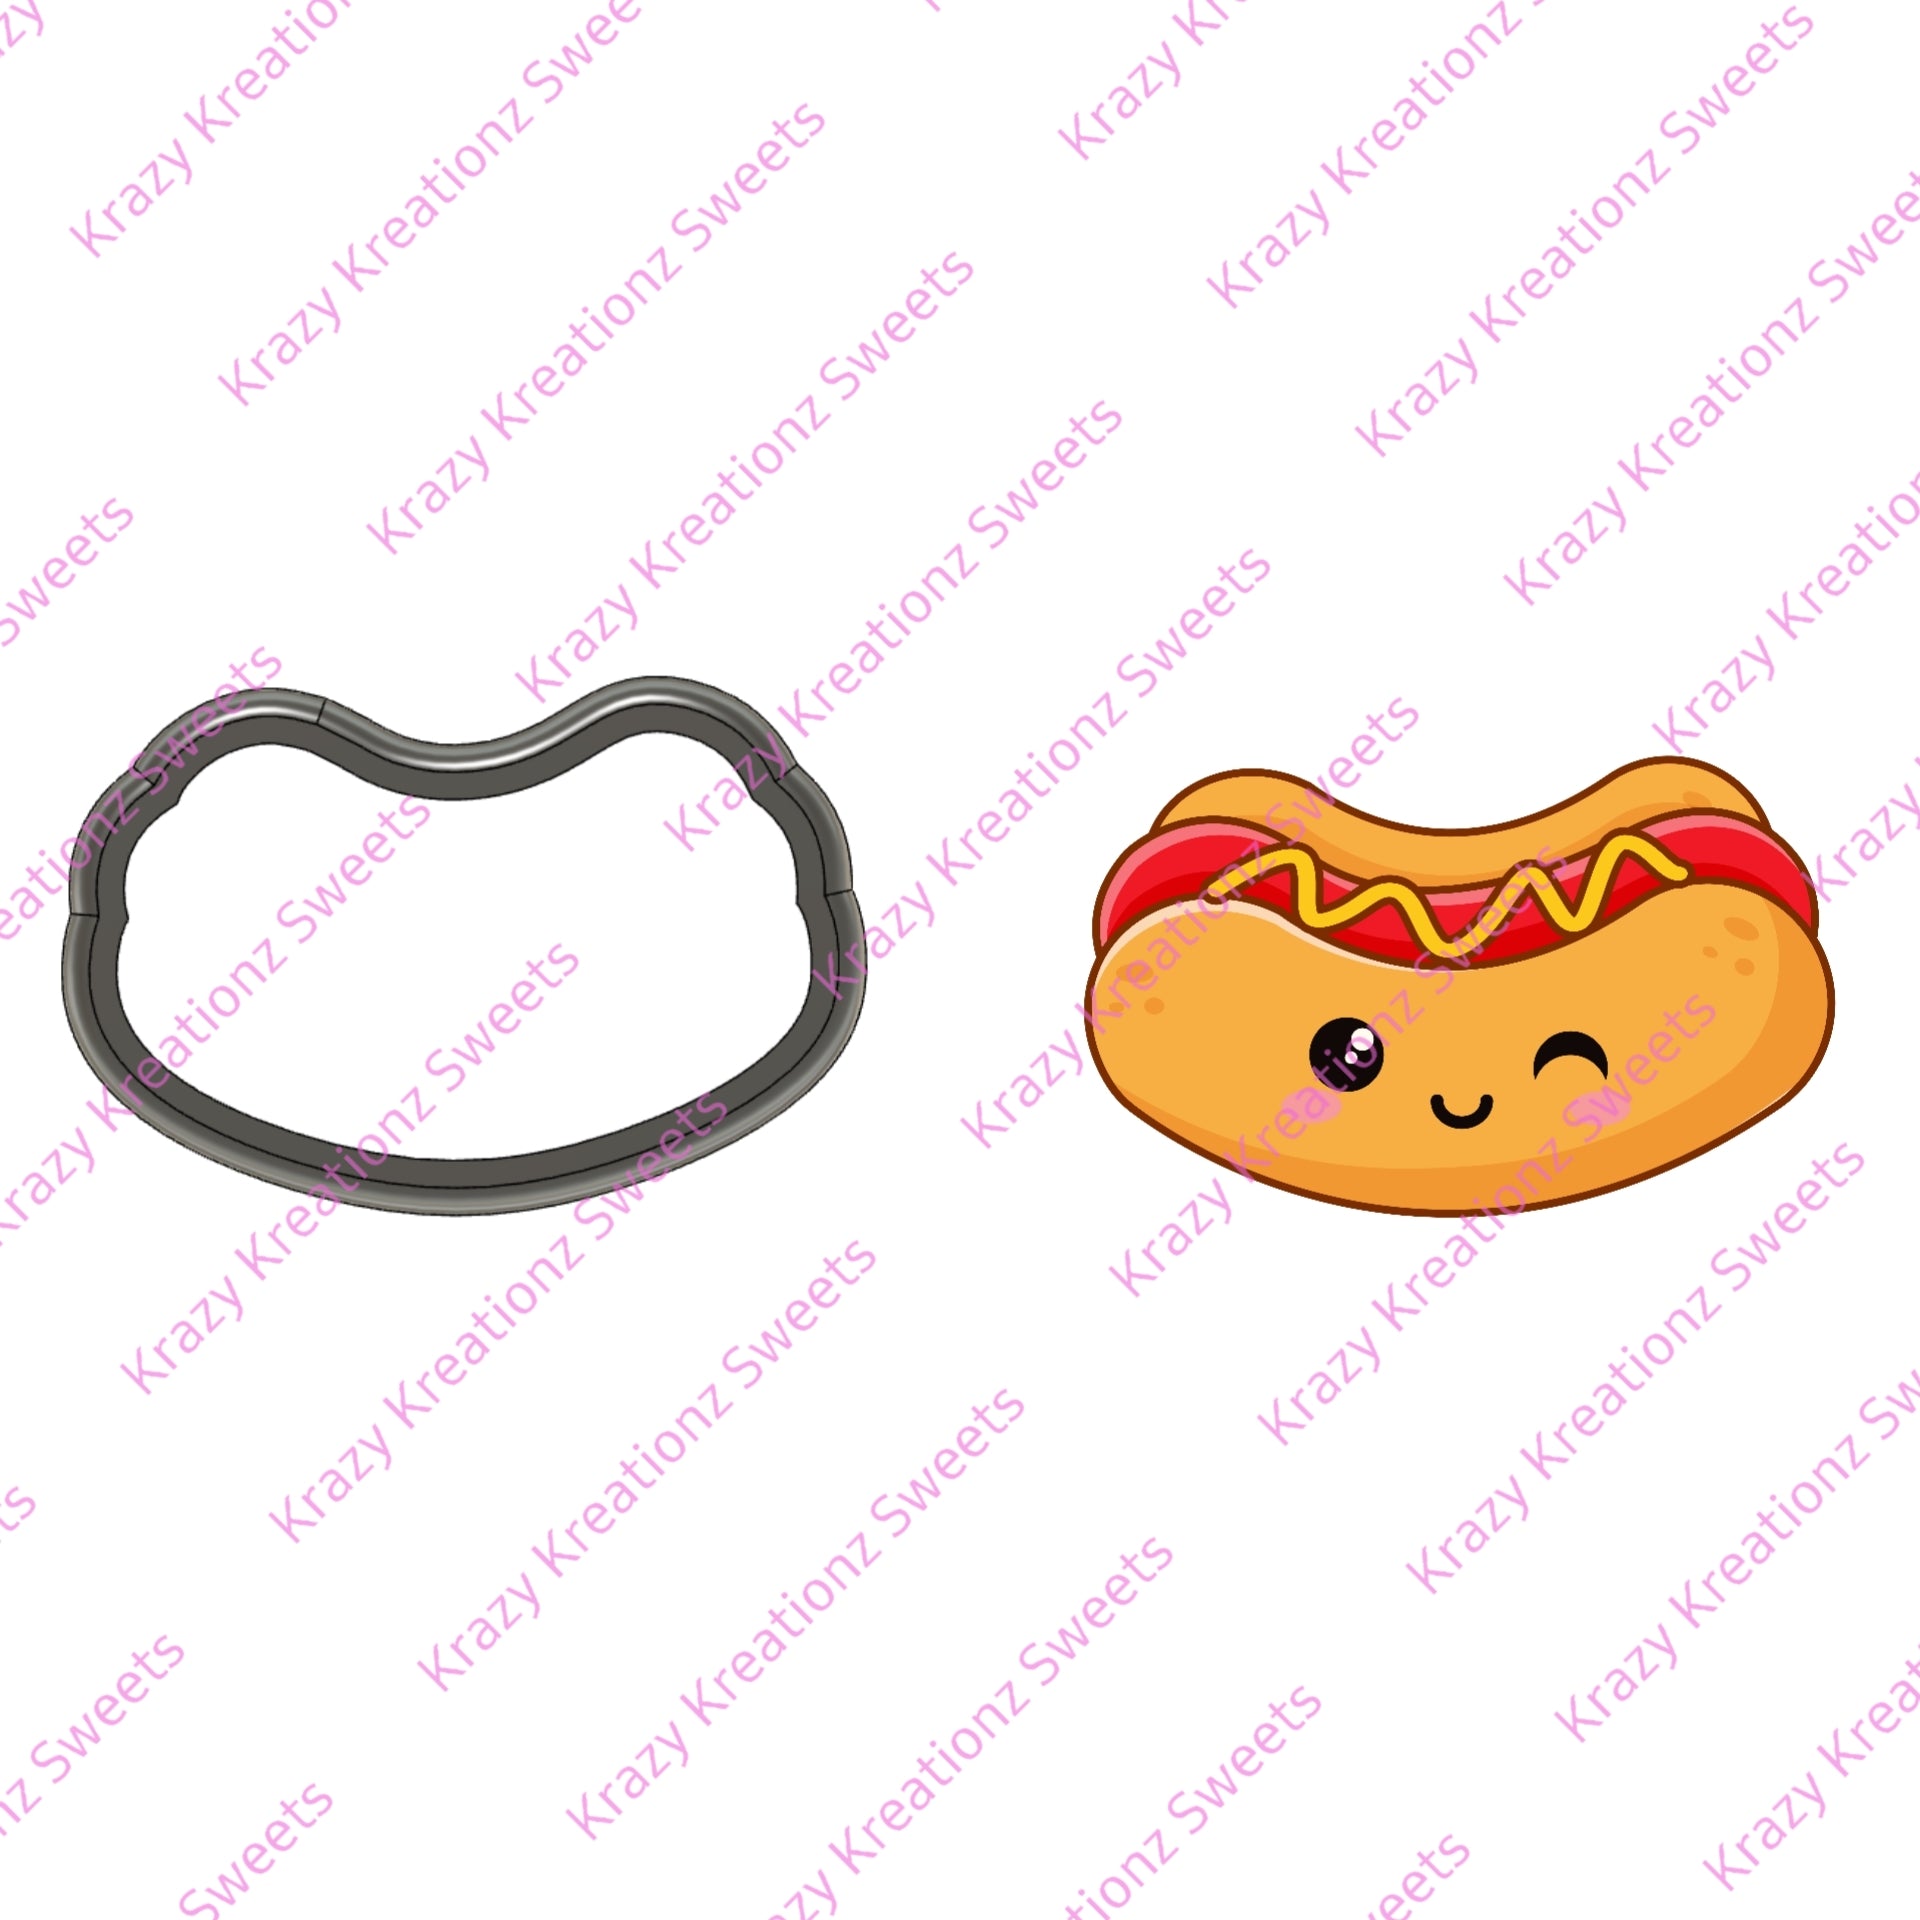 Smiley Hot dog Cookie Cutter